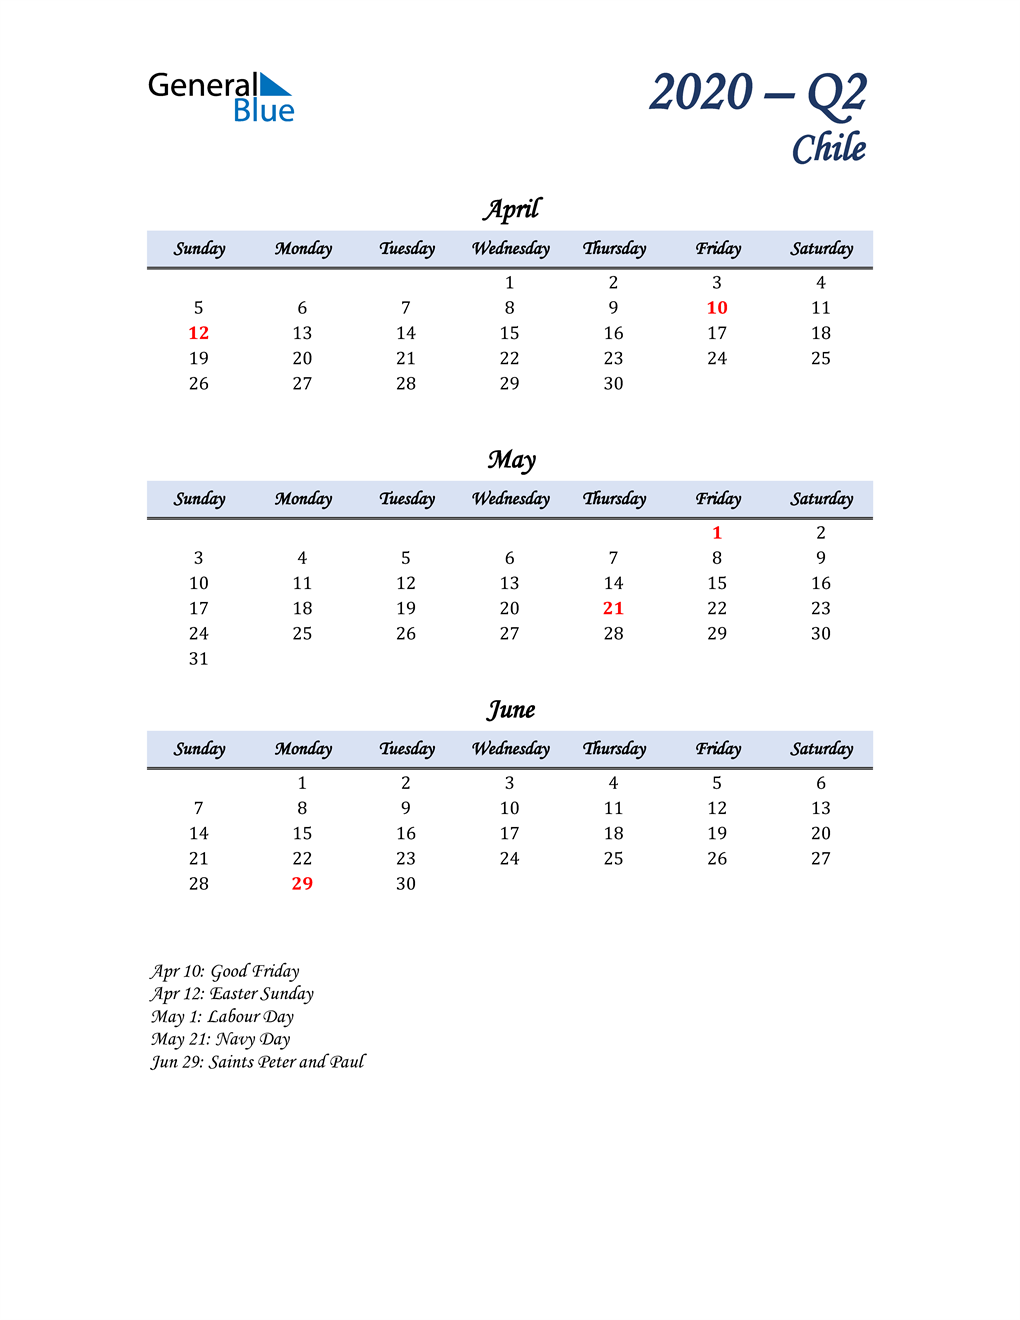  April, May, and June Calendar for Chile